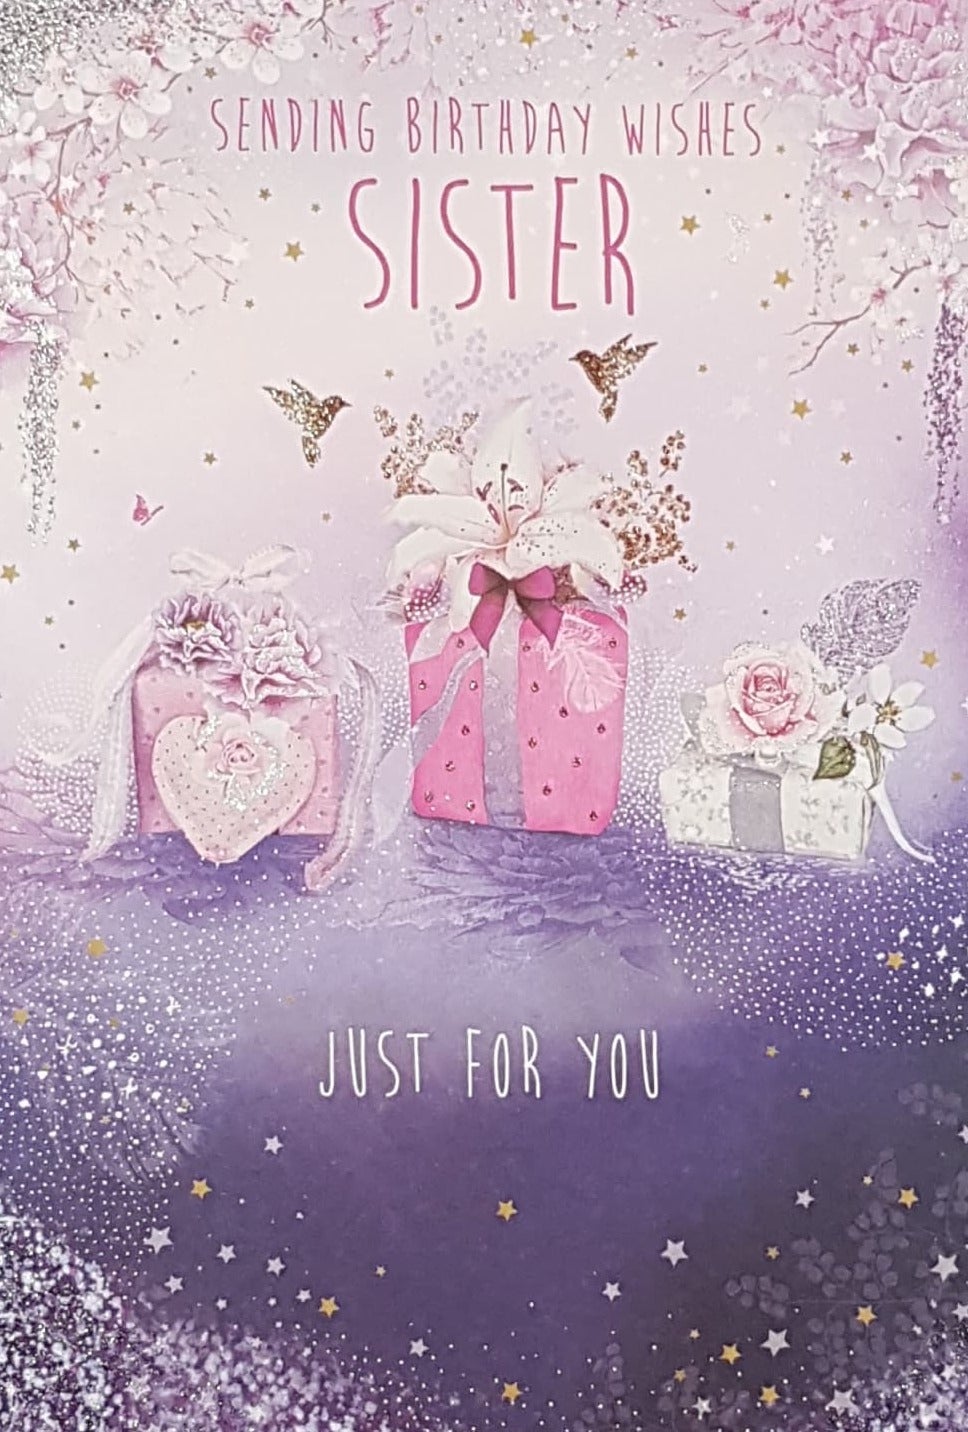 Birthday Card - Sister / Three Fabulous Gift Boxes Decorated With Flowers